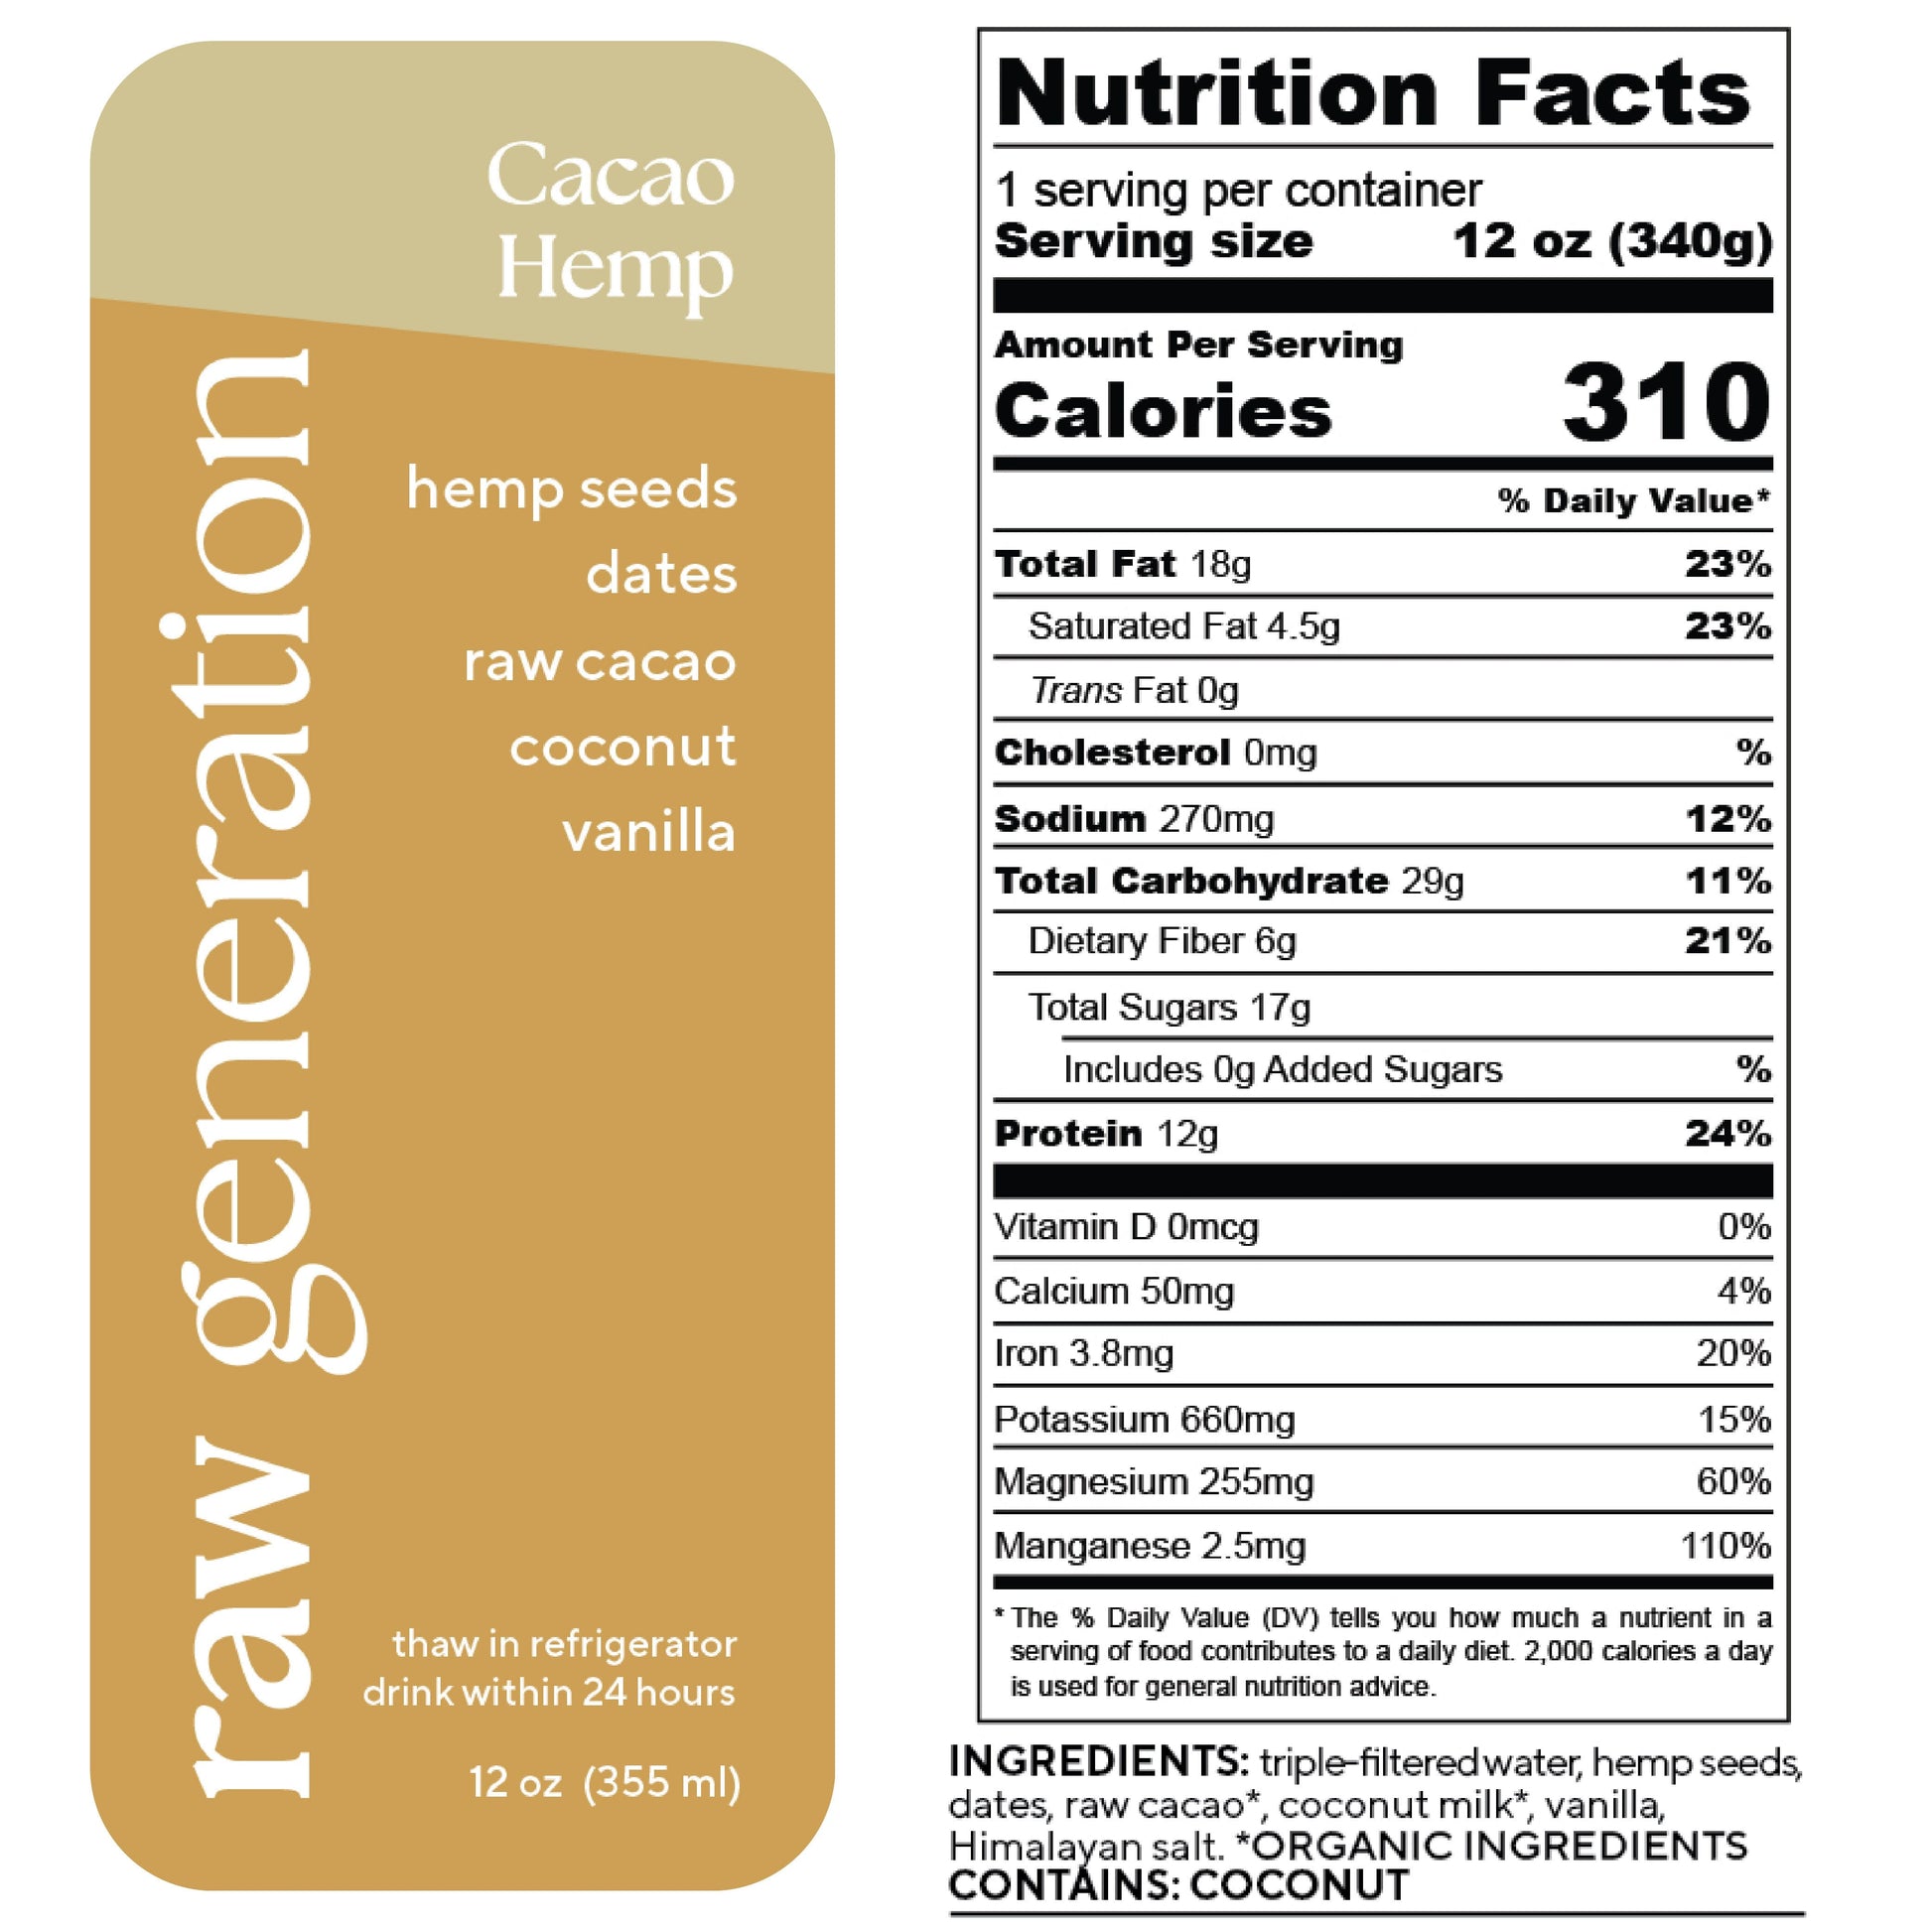 Nutrition Facts, 1 serving/container, Serving size 12 oz (340g), Calories 310, Total Fat 18g, Saturated Fat 4.5g, Trans Fat 0g, Cholesterol 0mg, Sodium 270mg, Total Carbohydrate 29g, Dietary Fiber 6g, Total Sugars 17g, Added Sugars 0g, Protein 12g, Vitamin D 0mcg, Calcium 50mg, Iron 3.8mg, Potassium 660mg, Magnesium 255mg, Manganese 0.25mg; Ingredients used: triple-filtered water, hemp seeds, dates, raw cacao, organic coconut milk, vanilla extract, Himalayan salt. CONTAINS: COCONUT